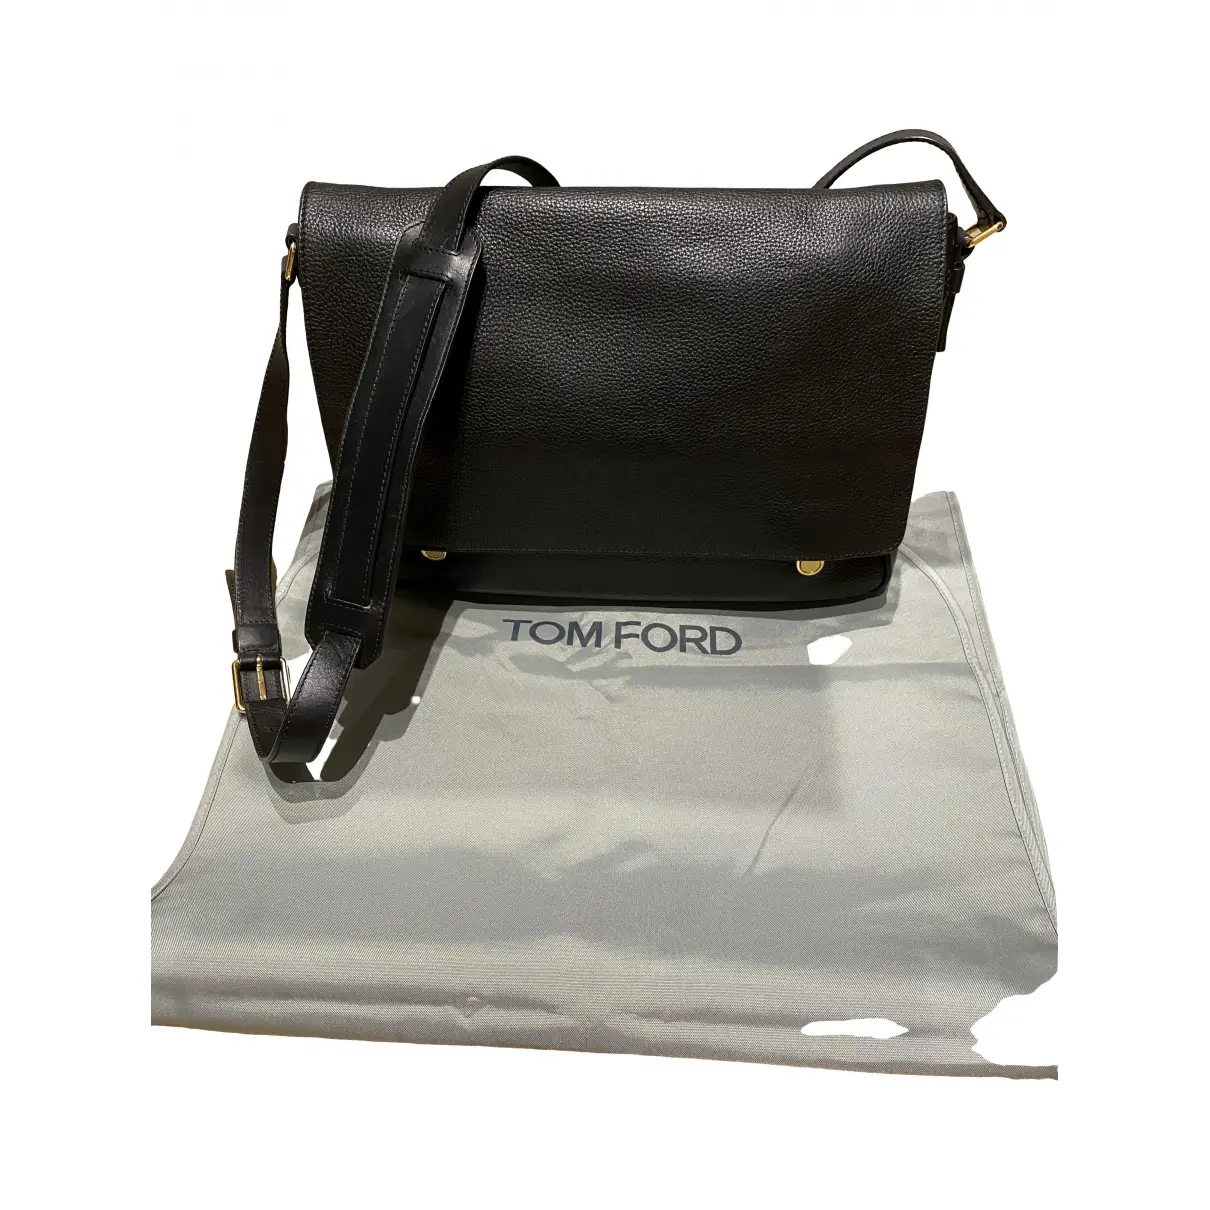 Leather satchel Tom Ford